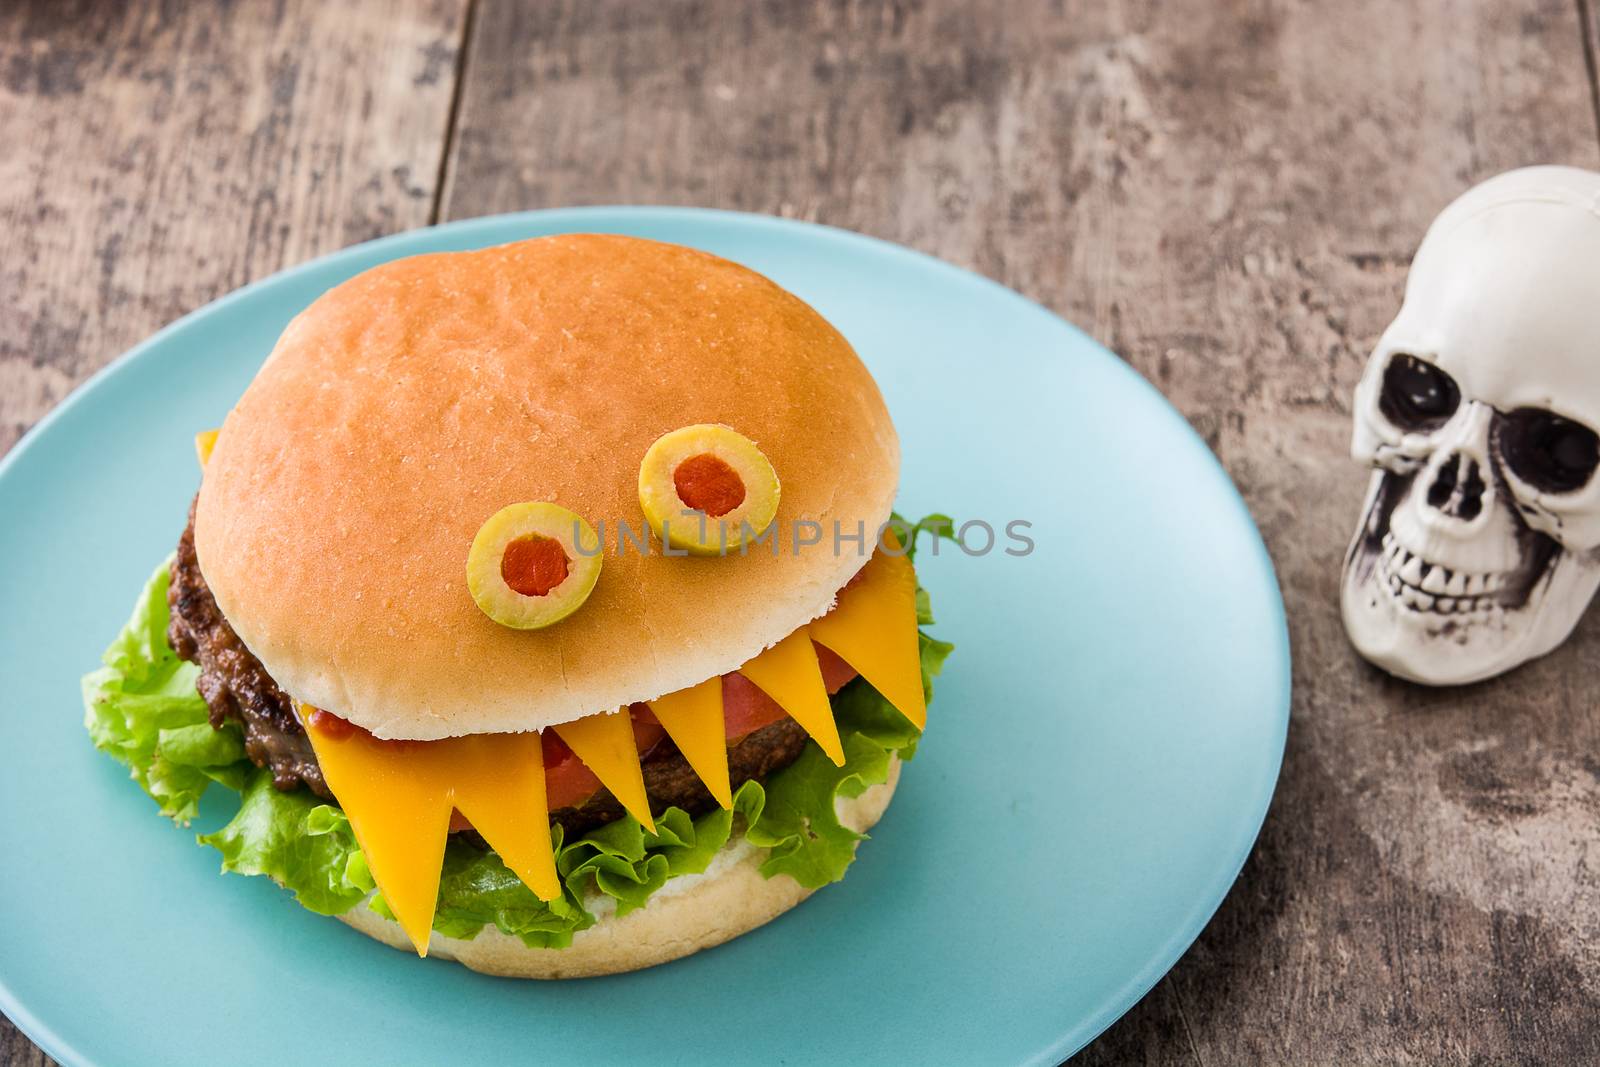 Halloween burger monsters on wooden table